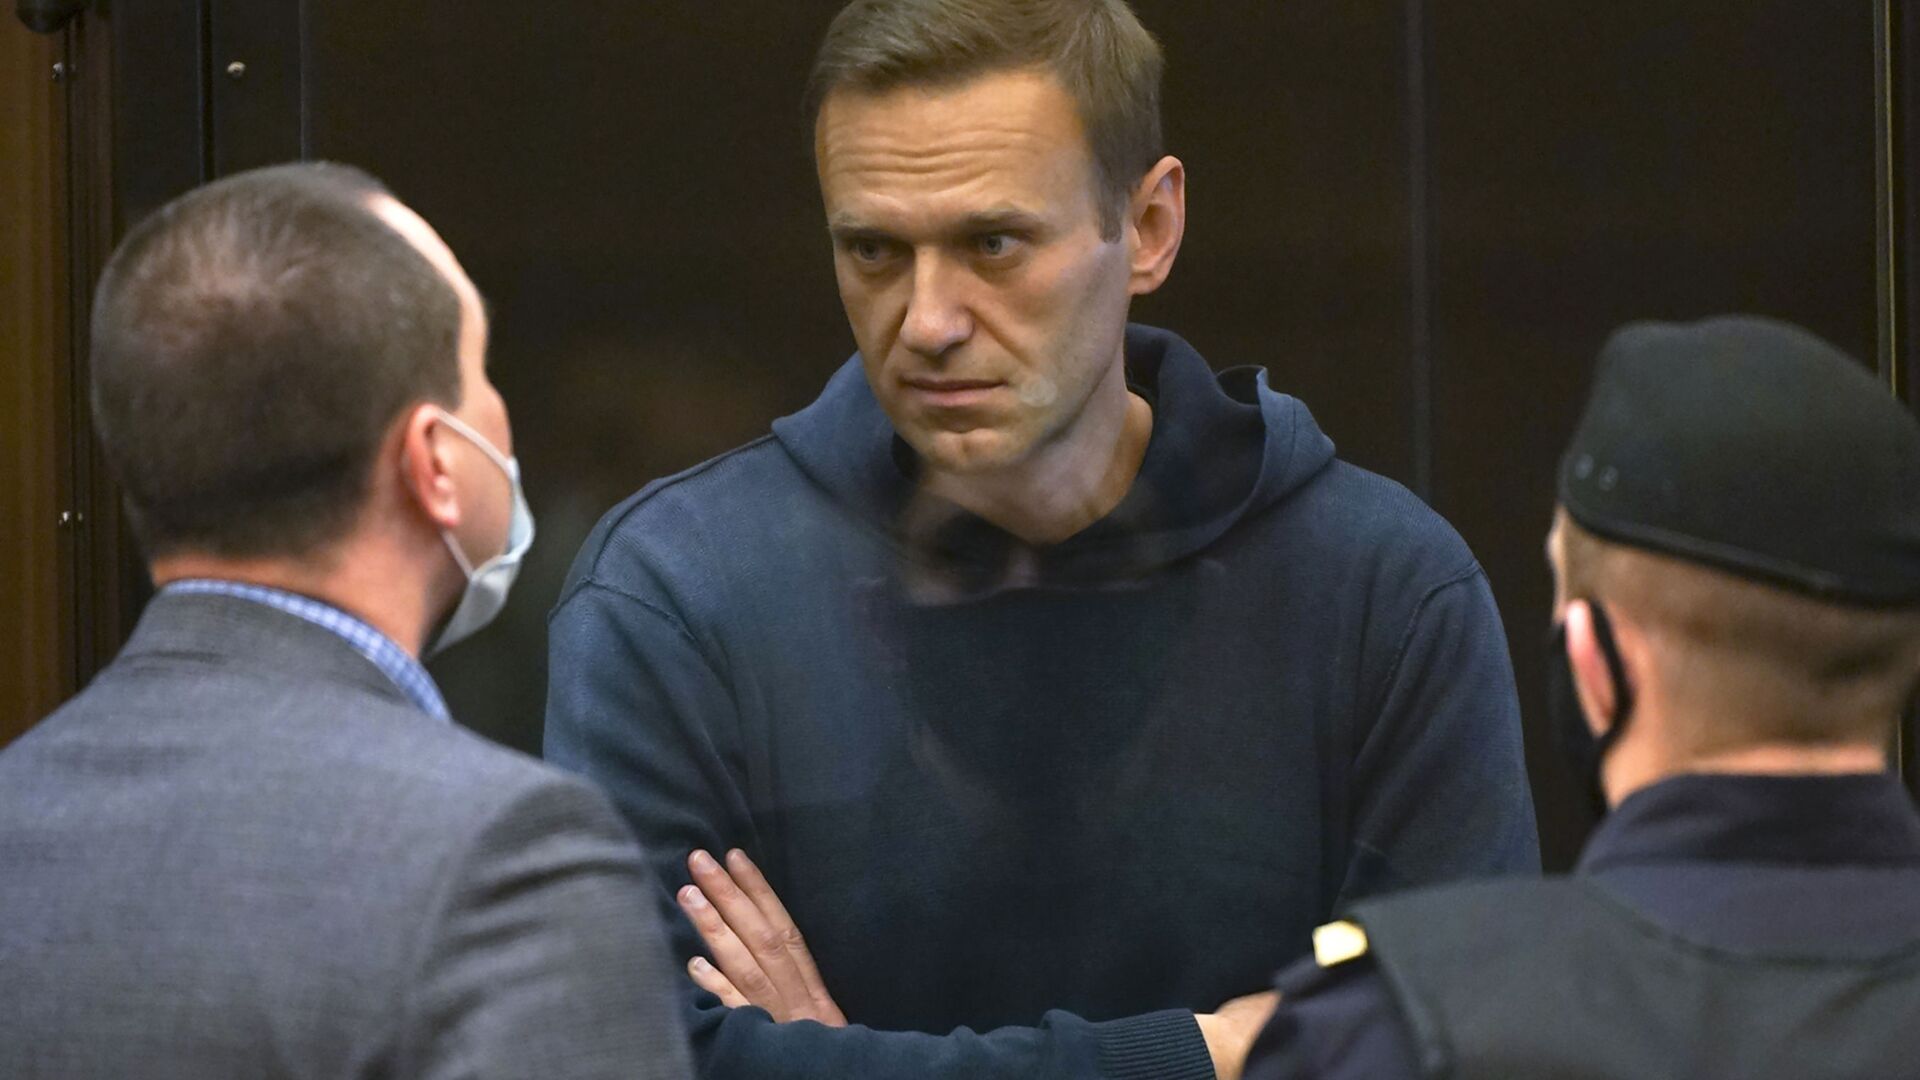 In this handout photo provided by Moscow City Court Russian opposition leader Alexei Navalny talks to one of his lawyers, left, while standing in the cage during a hearing to a motion from the Russian prison service to convert the suspended sentence of Navalny from the 2014 criminal conviction into a real prison term in the Moscow City Court in Moscow, Russia, Tuesday, Feb. 2, 2021. - Sputnik International, 1920, 02.03.2021